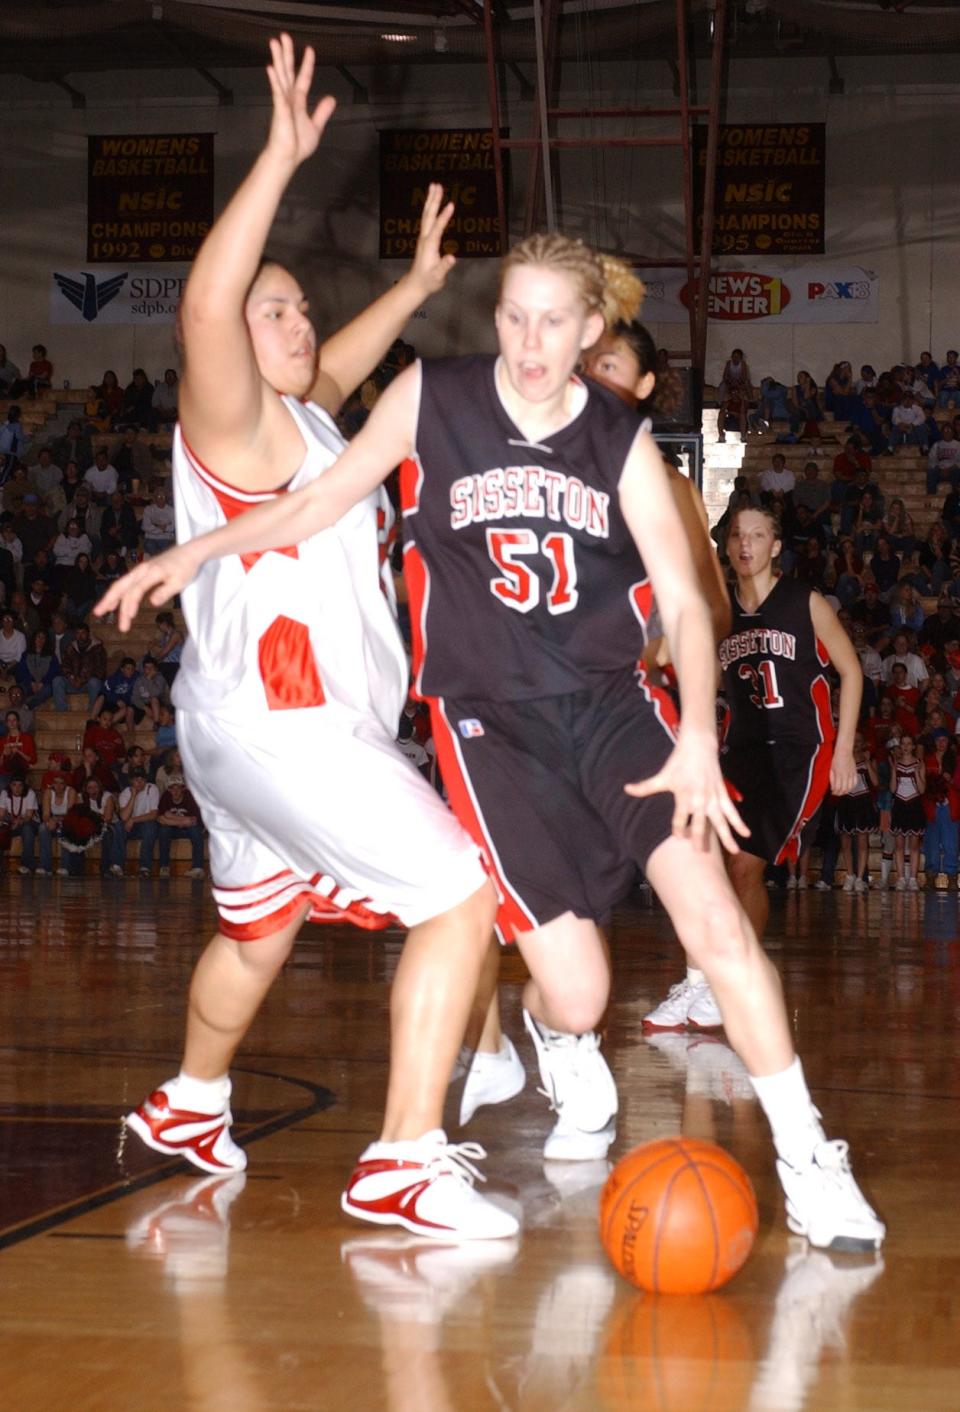 Sisseton's Courtney Grimsrud (51) drives past a Pine Ridge player during the championship game of the 2004 state Class A girls basketball tournament in the Barnett Center at Aberdeen. Sisseton won 68-57.